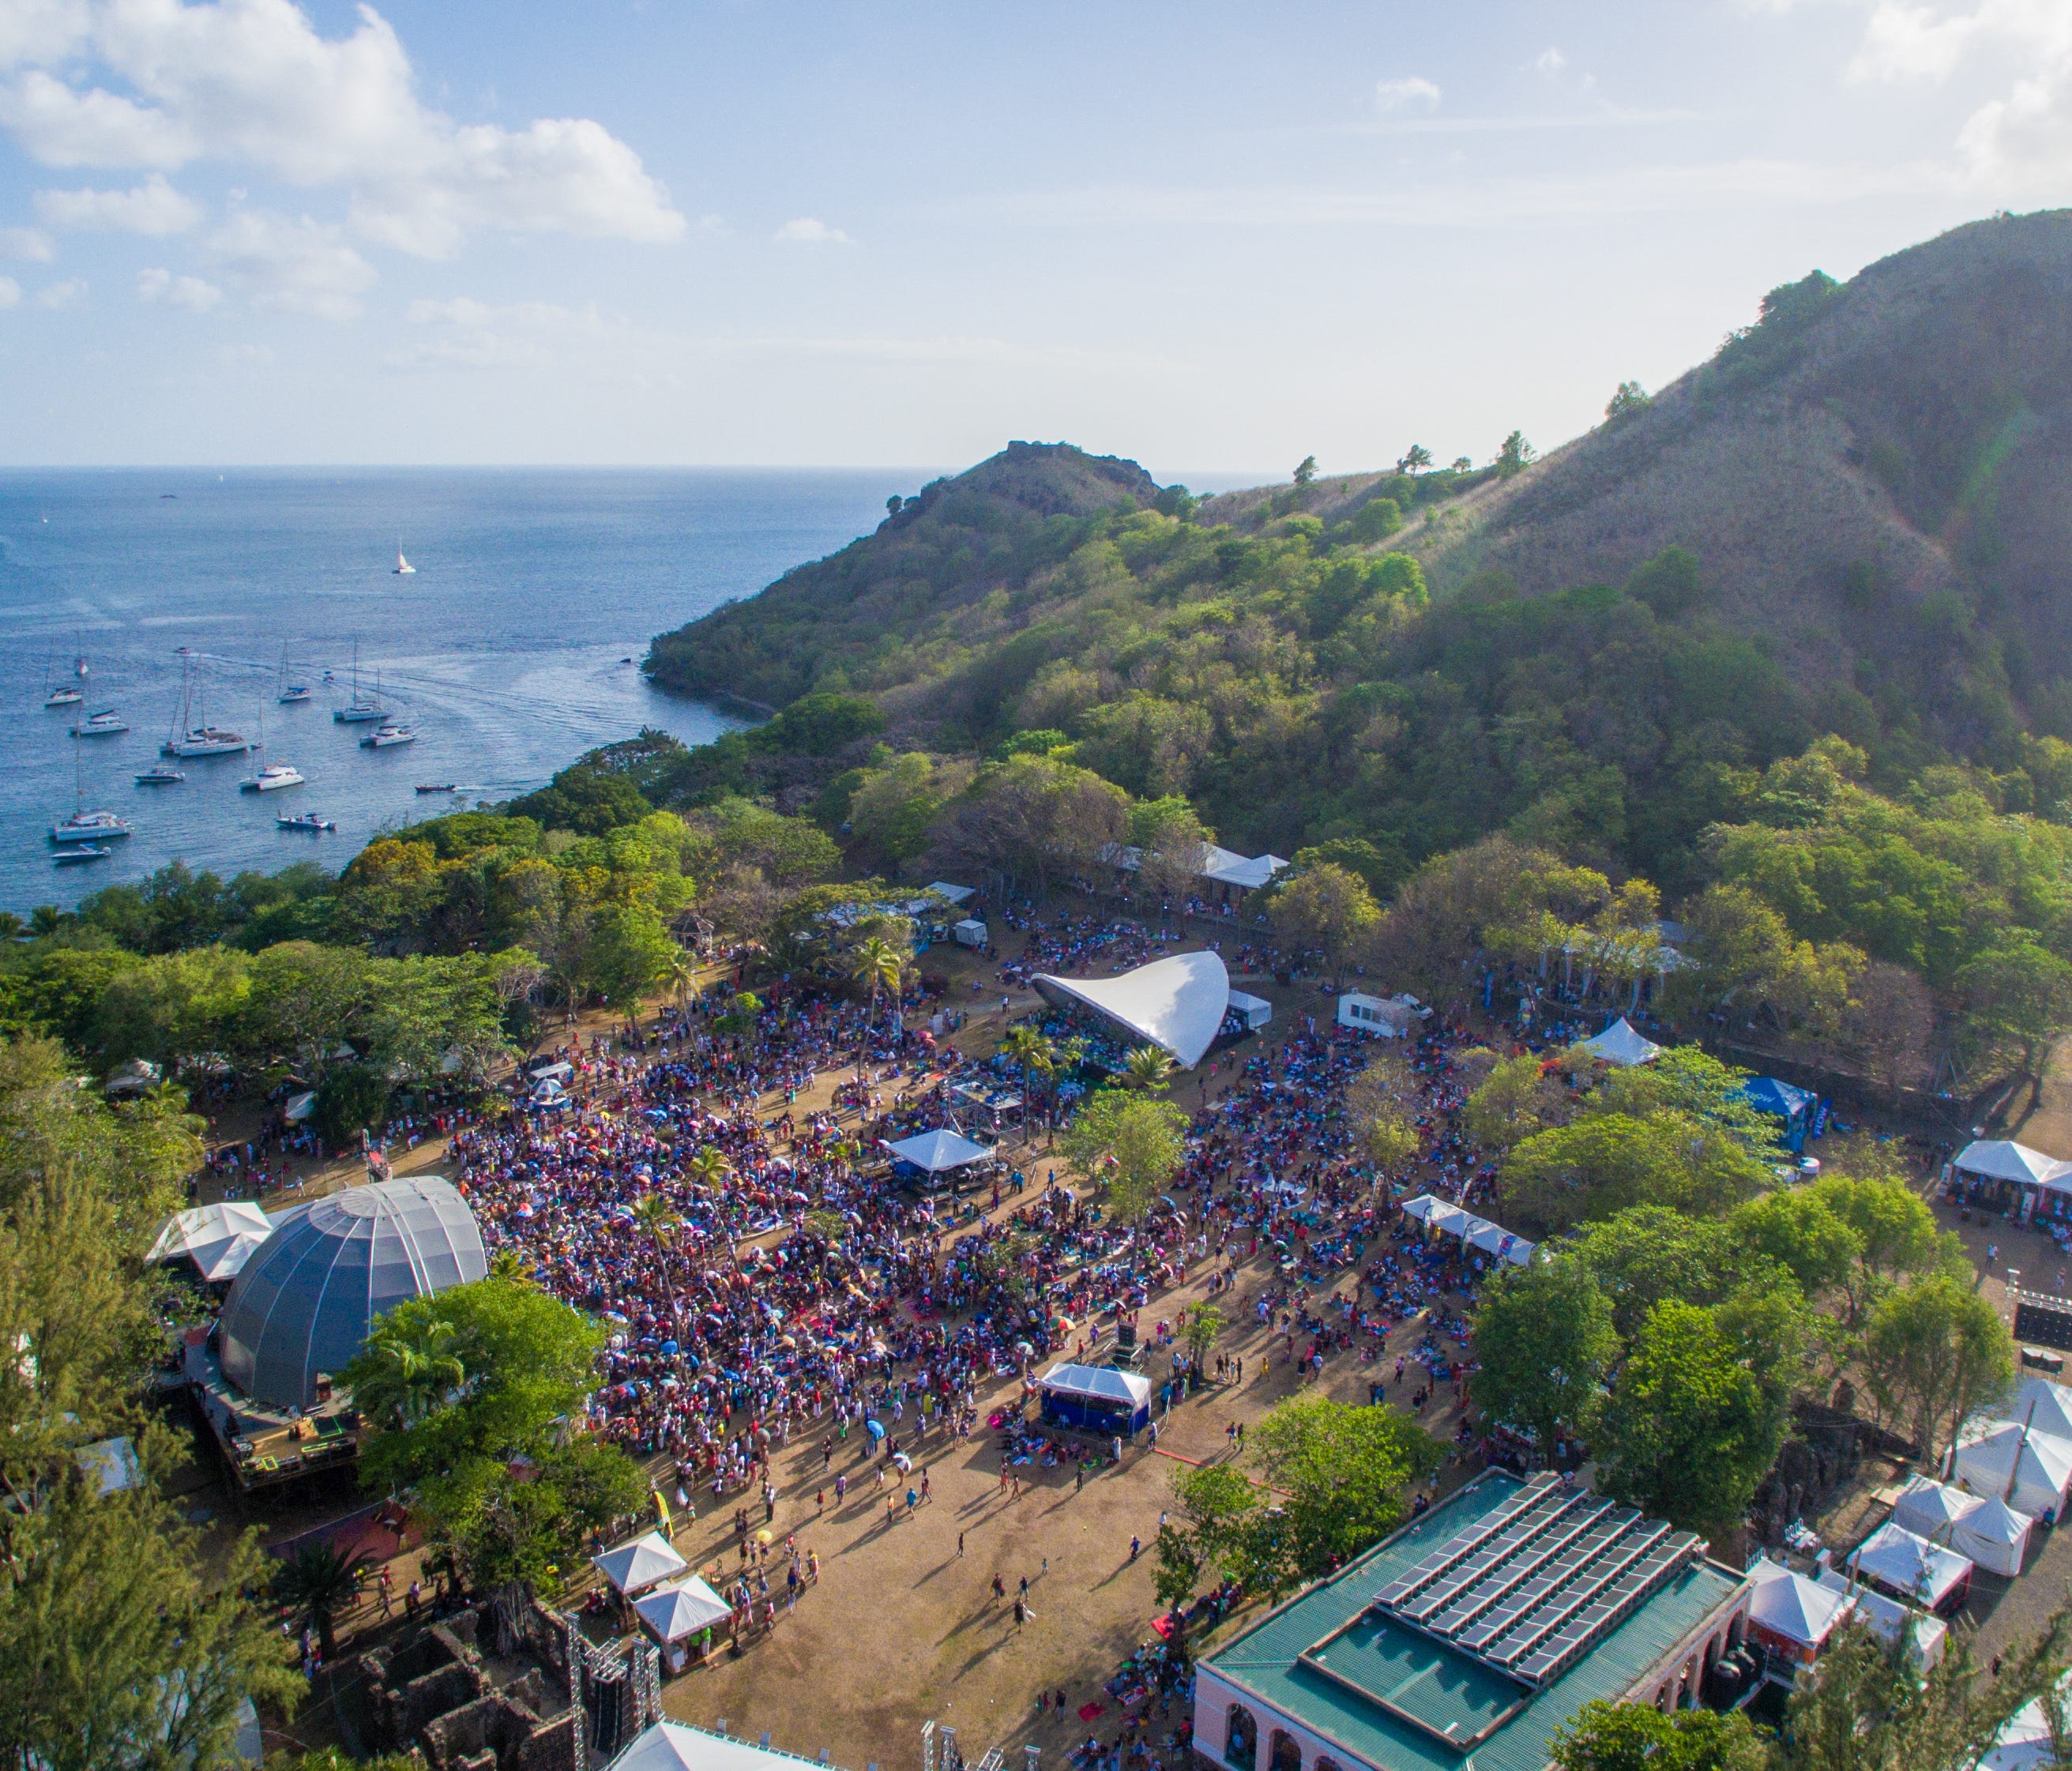 St. Lucia Jazz Fest at Pigeon Island National Park.